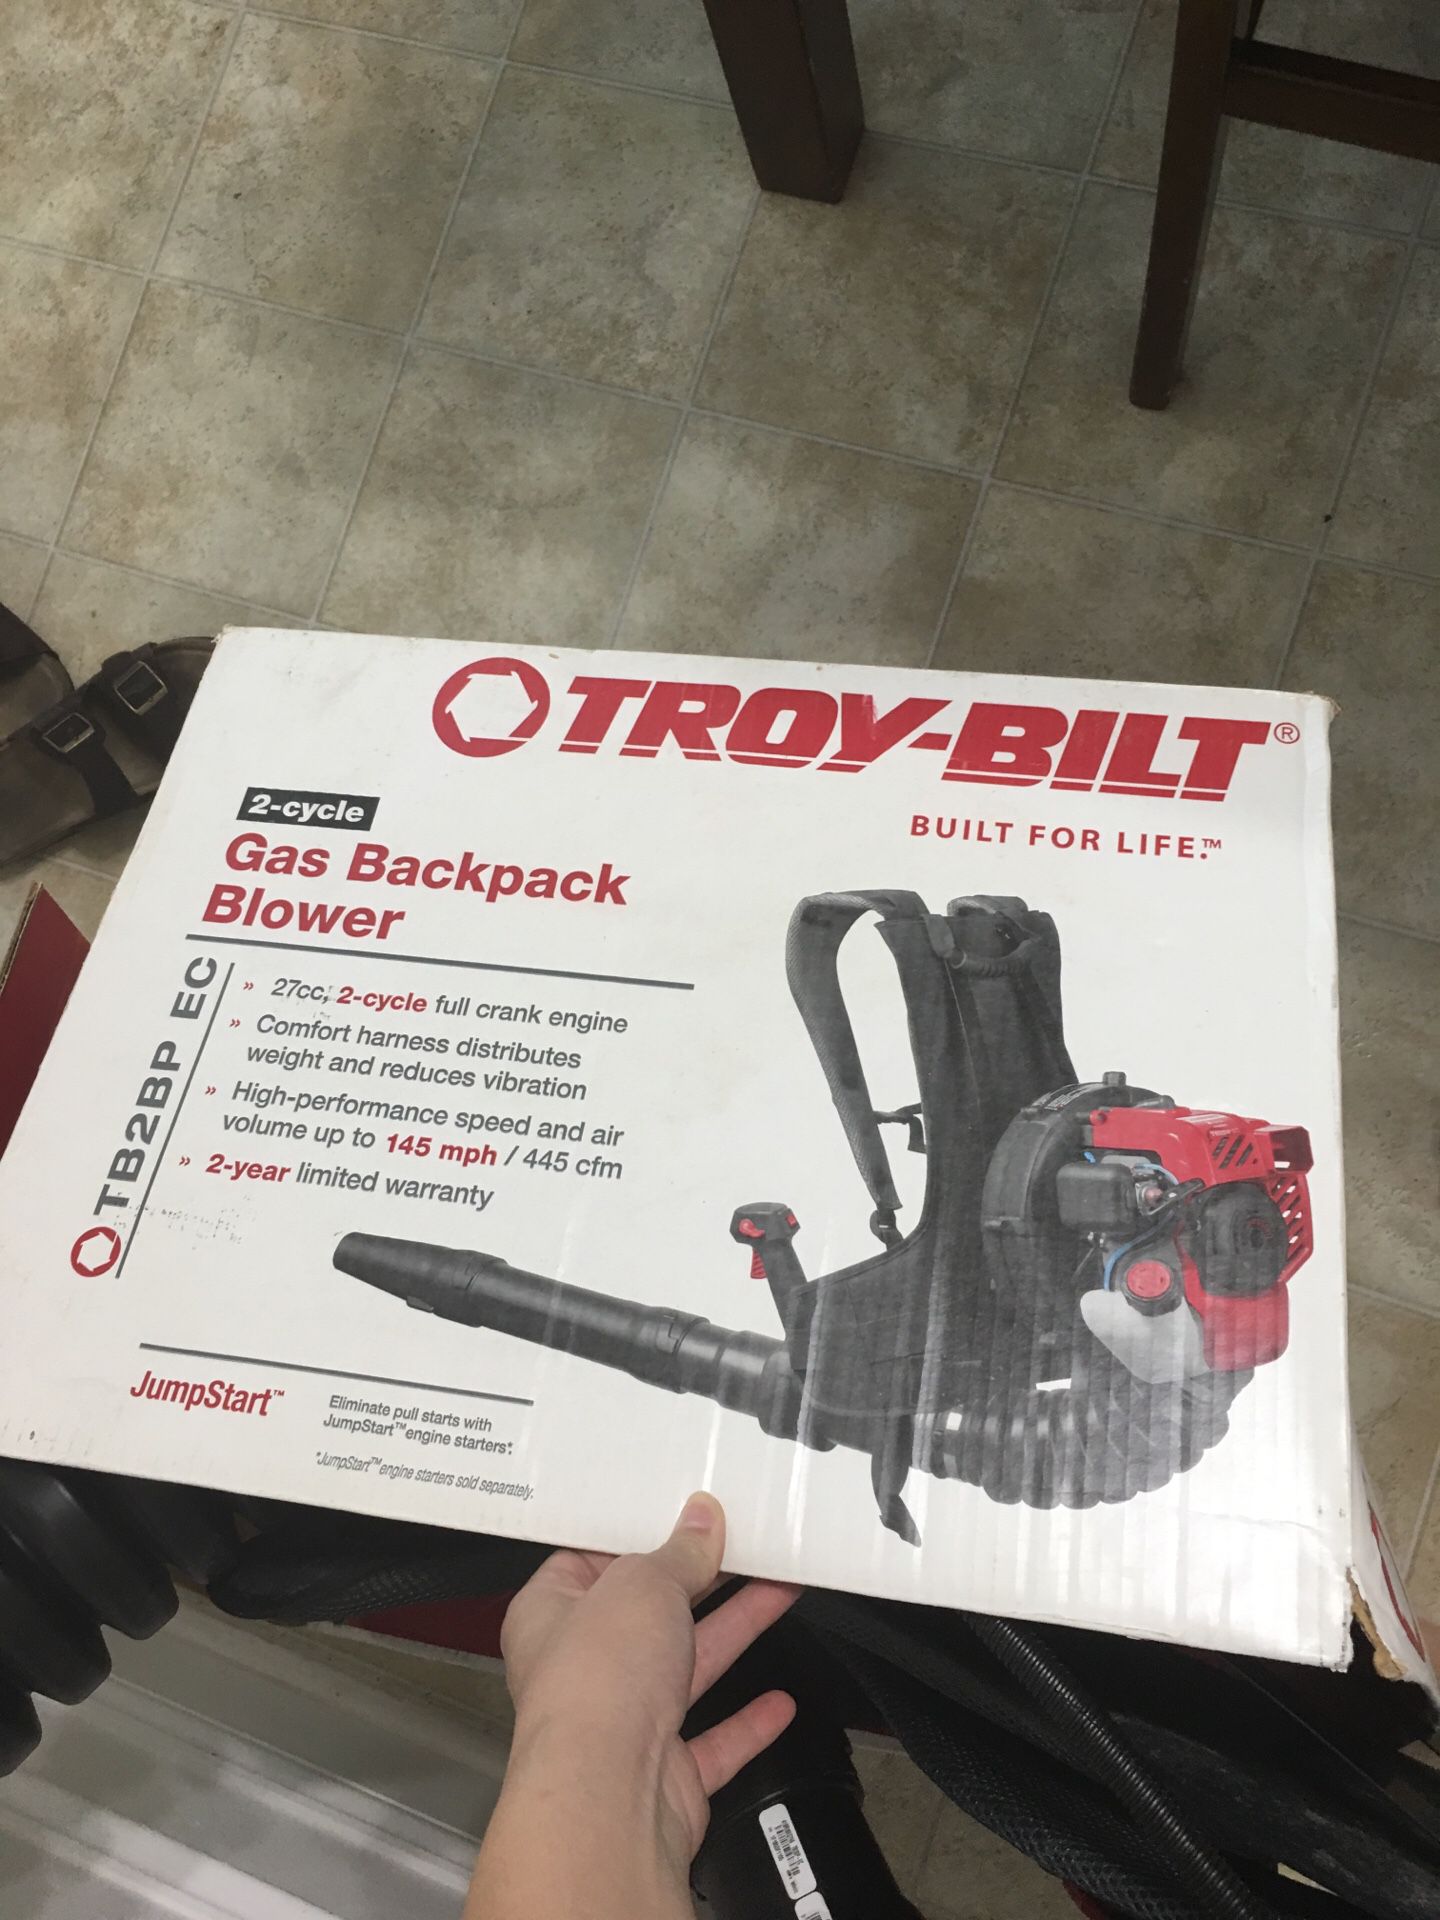 Gas backpack blower